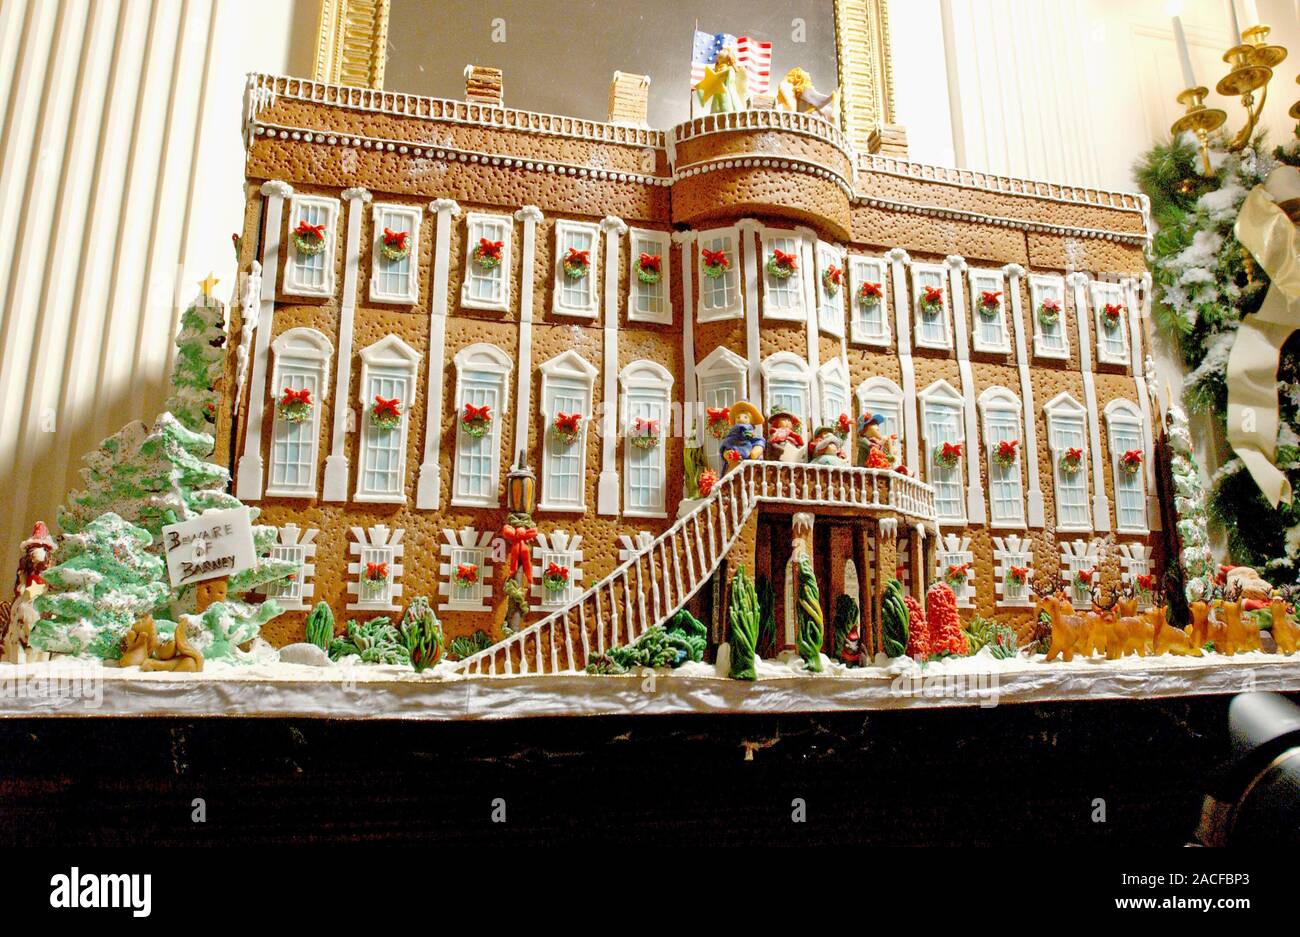 December 3, 2001, Washington, District of Columbia, USA: The White House Christmas decorations were shown to the press on December 3, 2001. Even though the Executive Mansion has been closed to tourists since the 9/11 terrorist attacks, the annual ritual of decorating the house continues. The gingerbread house is a re-creation of the White House as it appeared in 1800 when President John Adams became the first resident. The gingerbread house took approximately three weeks to create. The house is made from 80 pounds of gingerbread, 30 pounds of chocolate and 20 pounds of marzipan (Credit Im Stock Photo